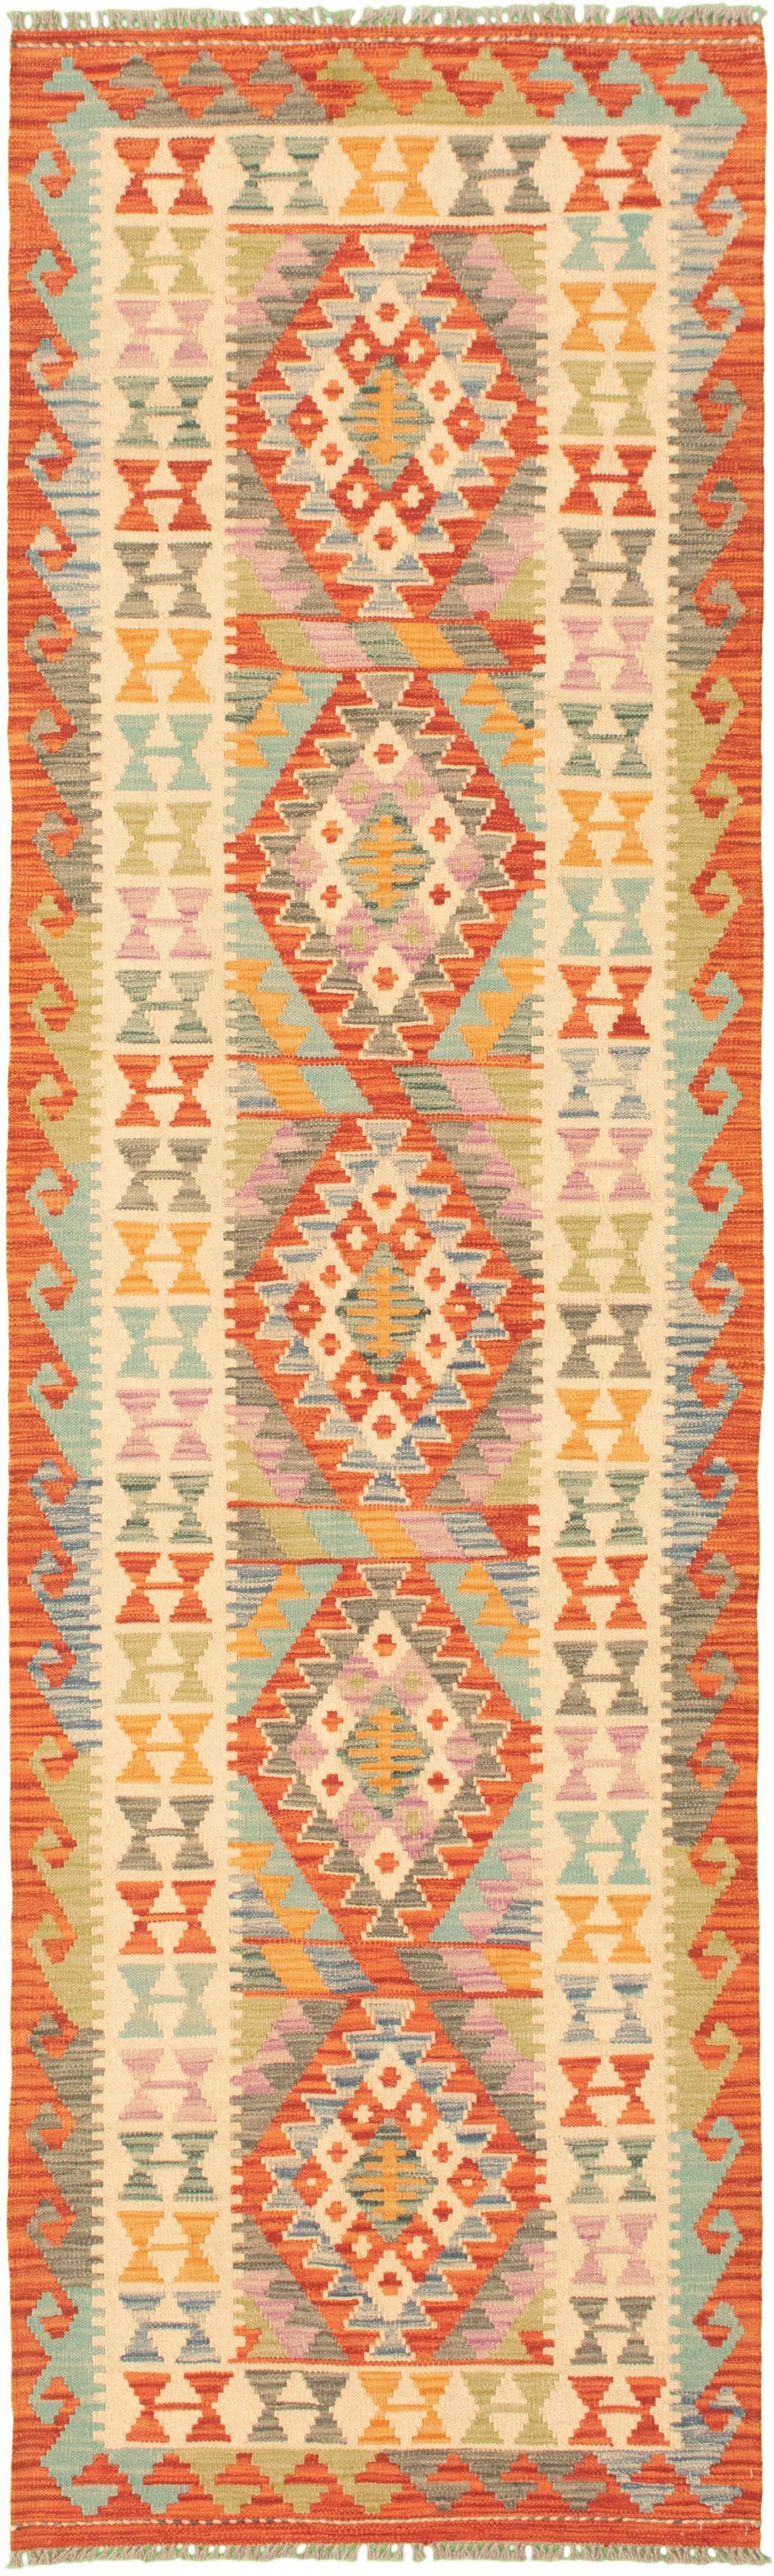 Hand woven Bold and Colorful  Cream Wool Kilim 2'9" x 9'9" Size: 2'9" x 9'9"  